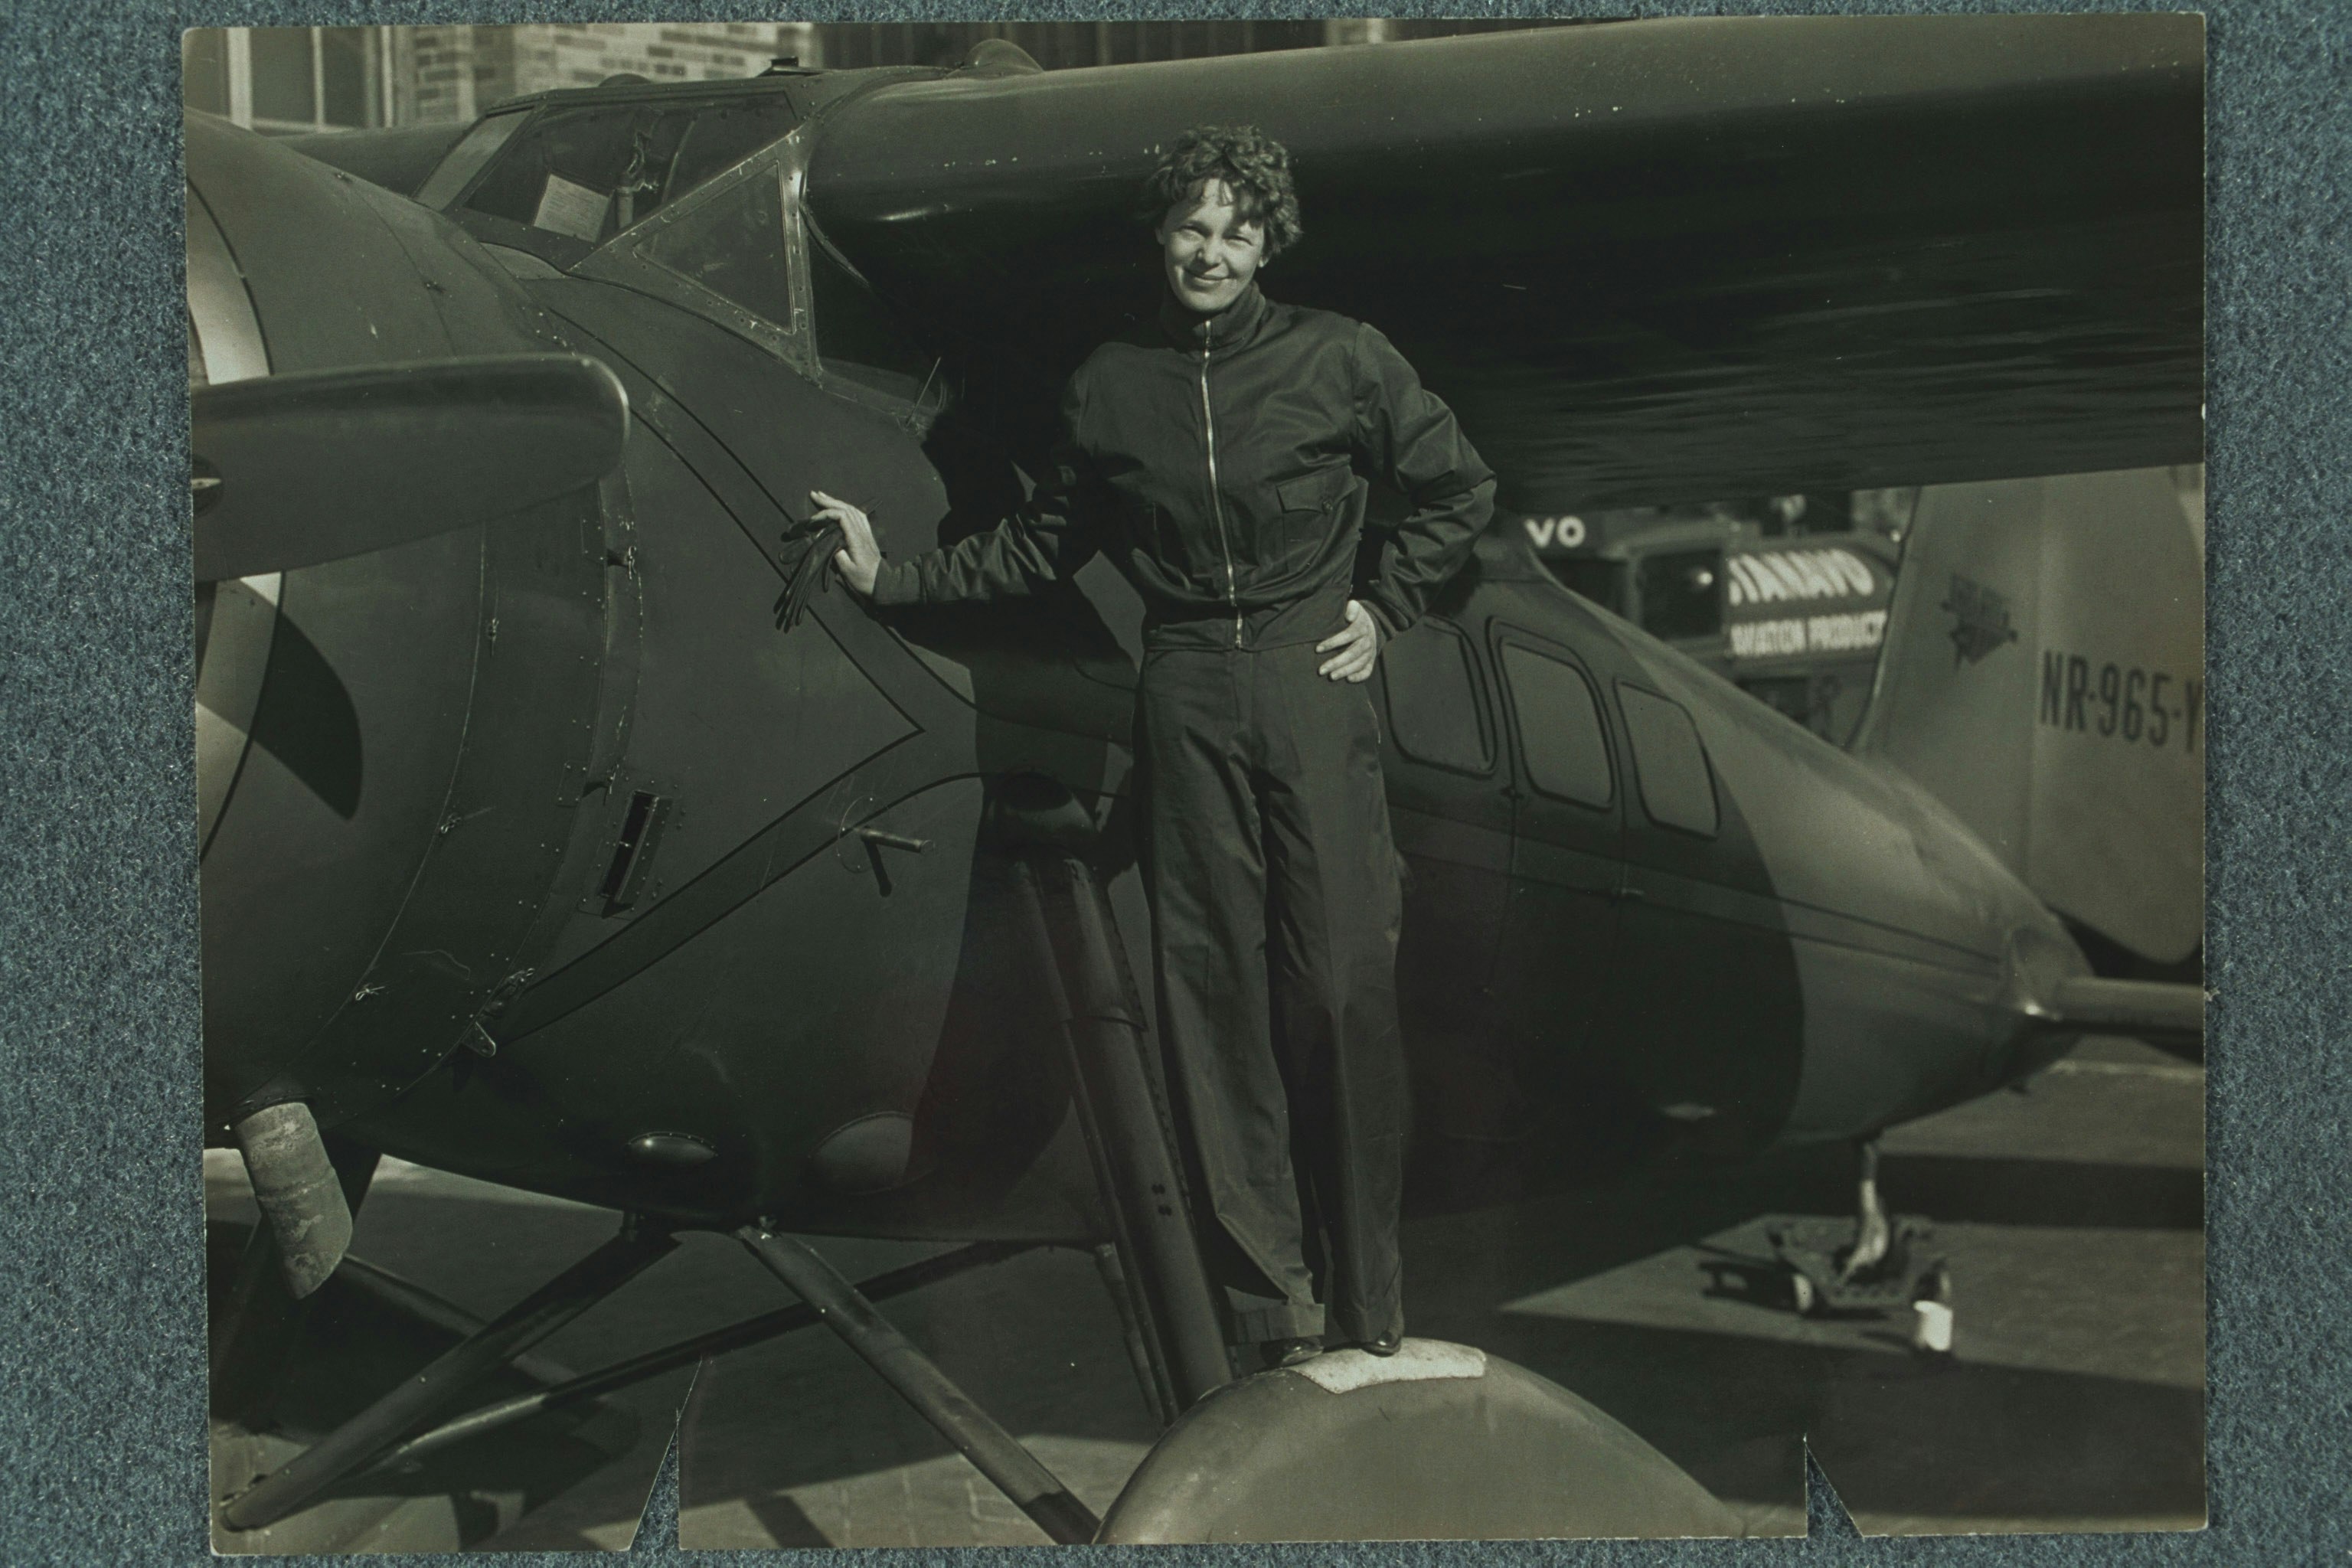 Amelia Earhart standing on the wheel of her airplane, probably the Lockheed "Vega."